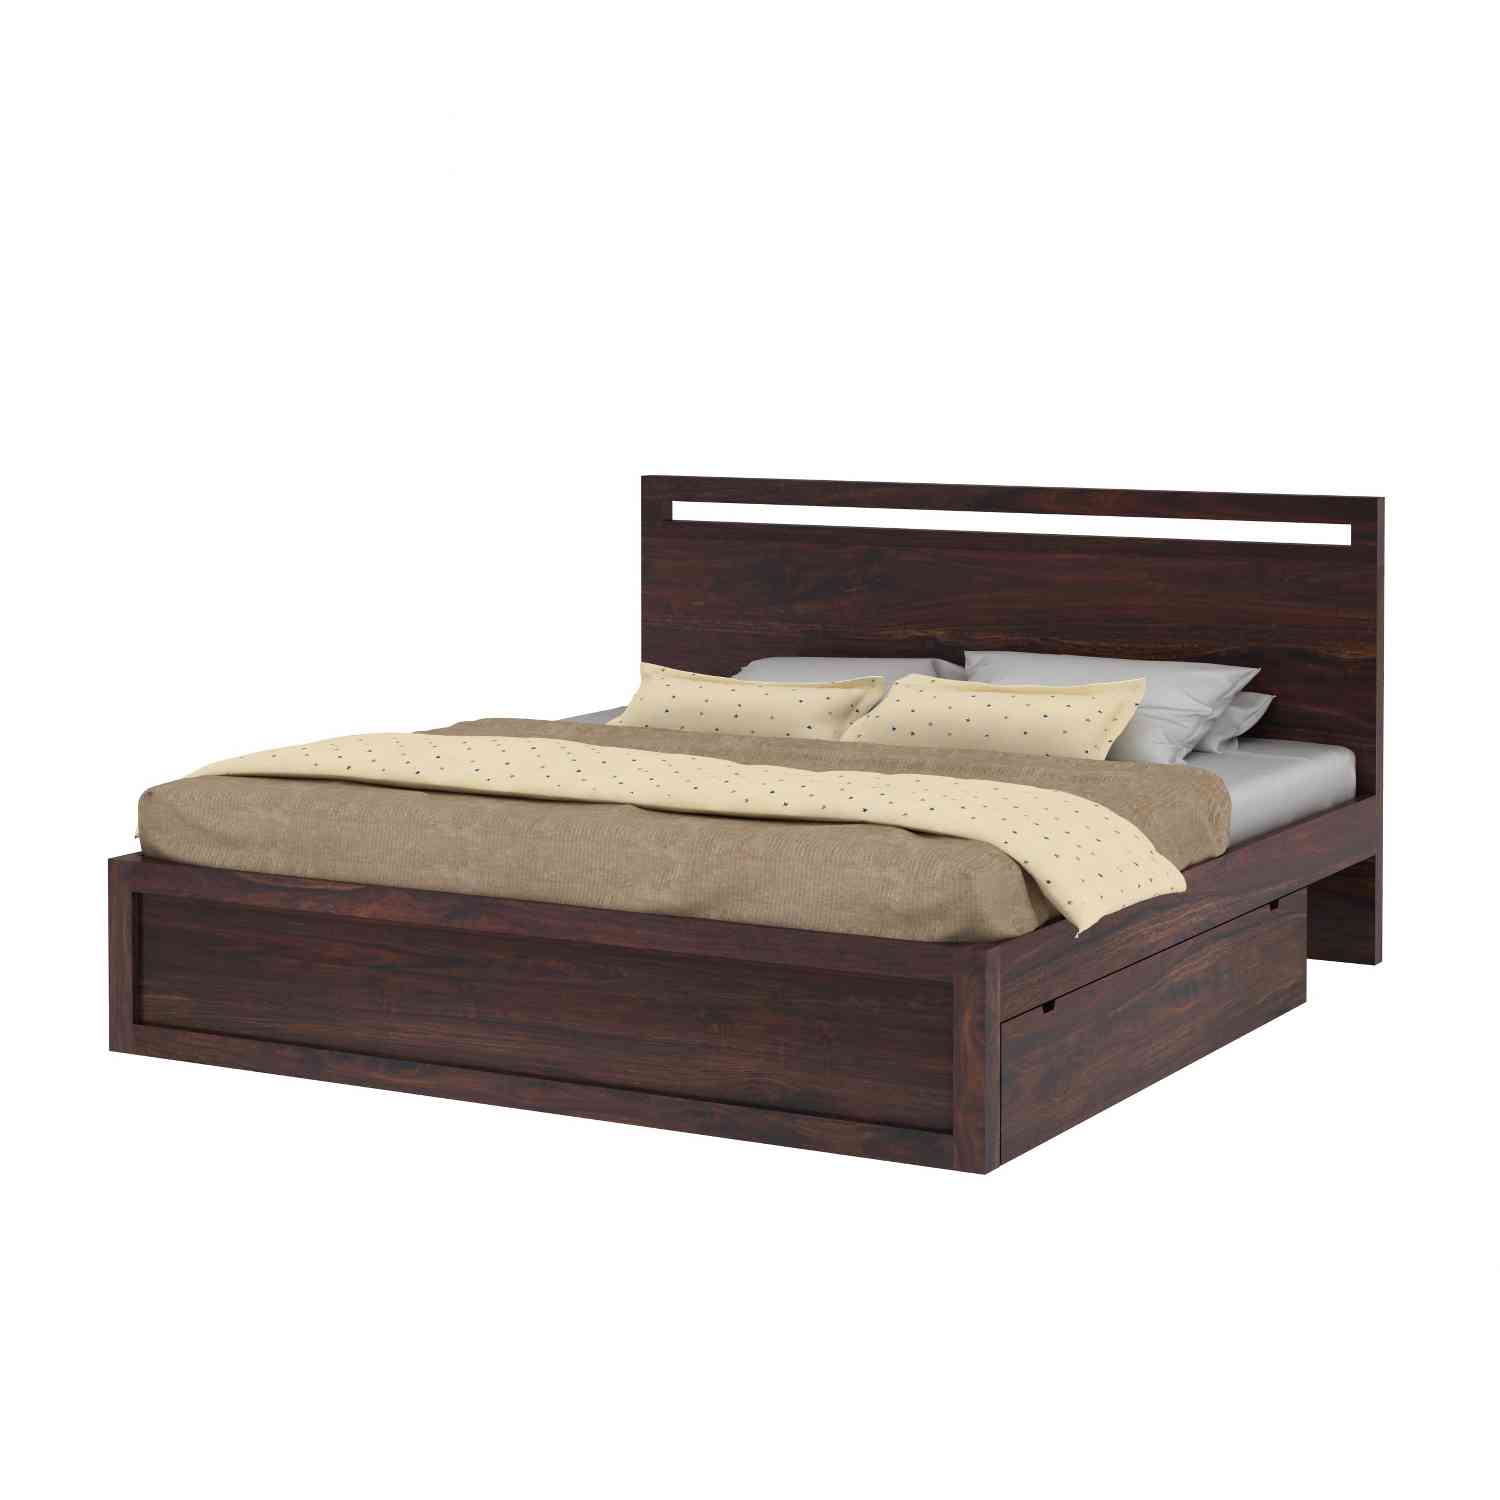 Livinn Solid Sheesham Wood Bed With Two Drawers (King Size, Walnut Finish)